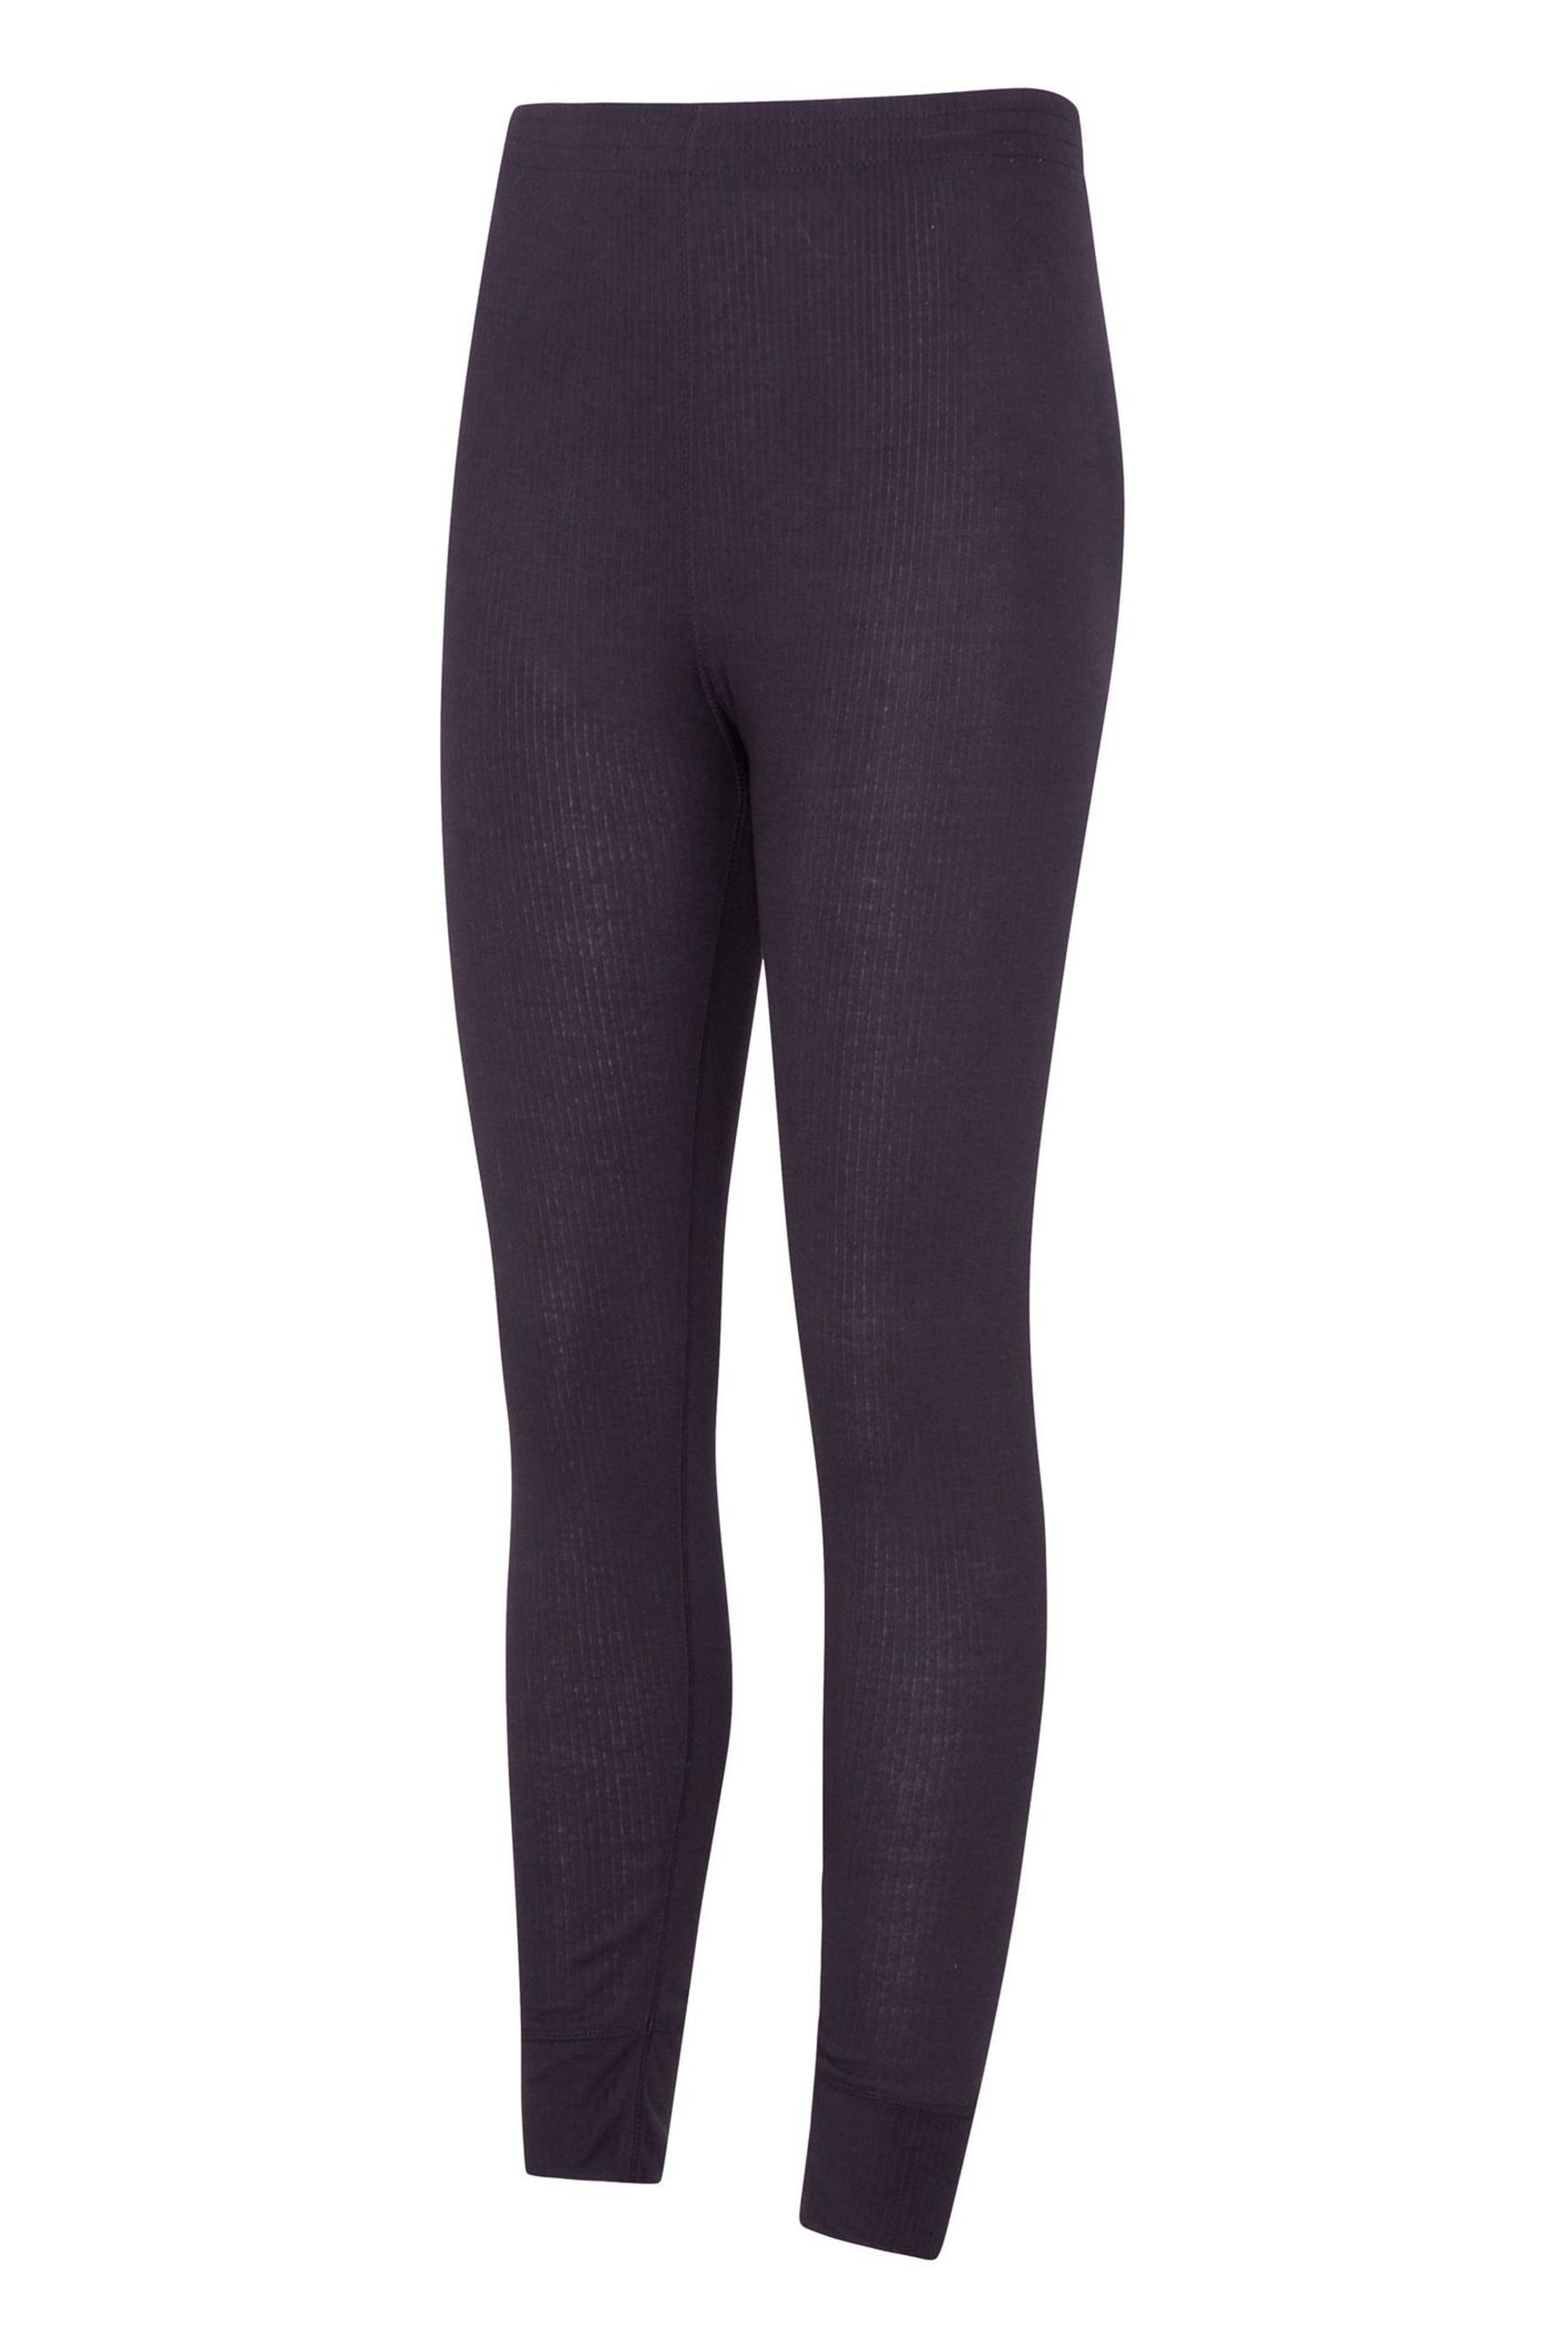 Buy Mountain Warehouse Black Talus Womens Base Layer Trousers from the ...